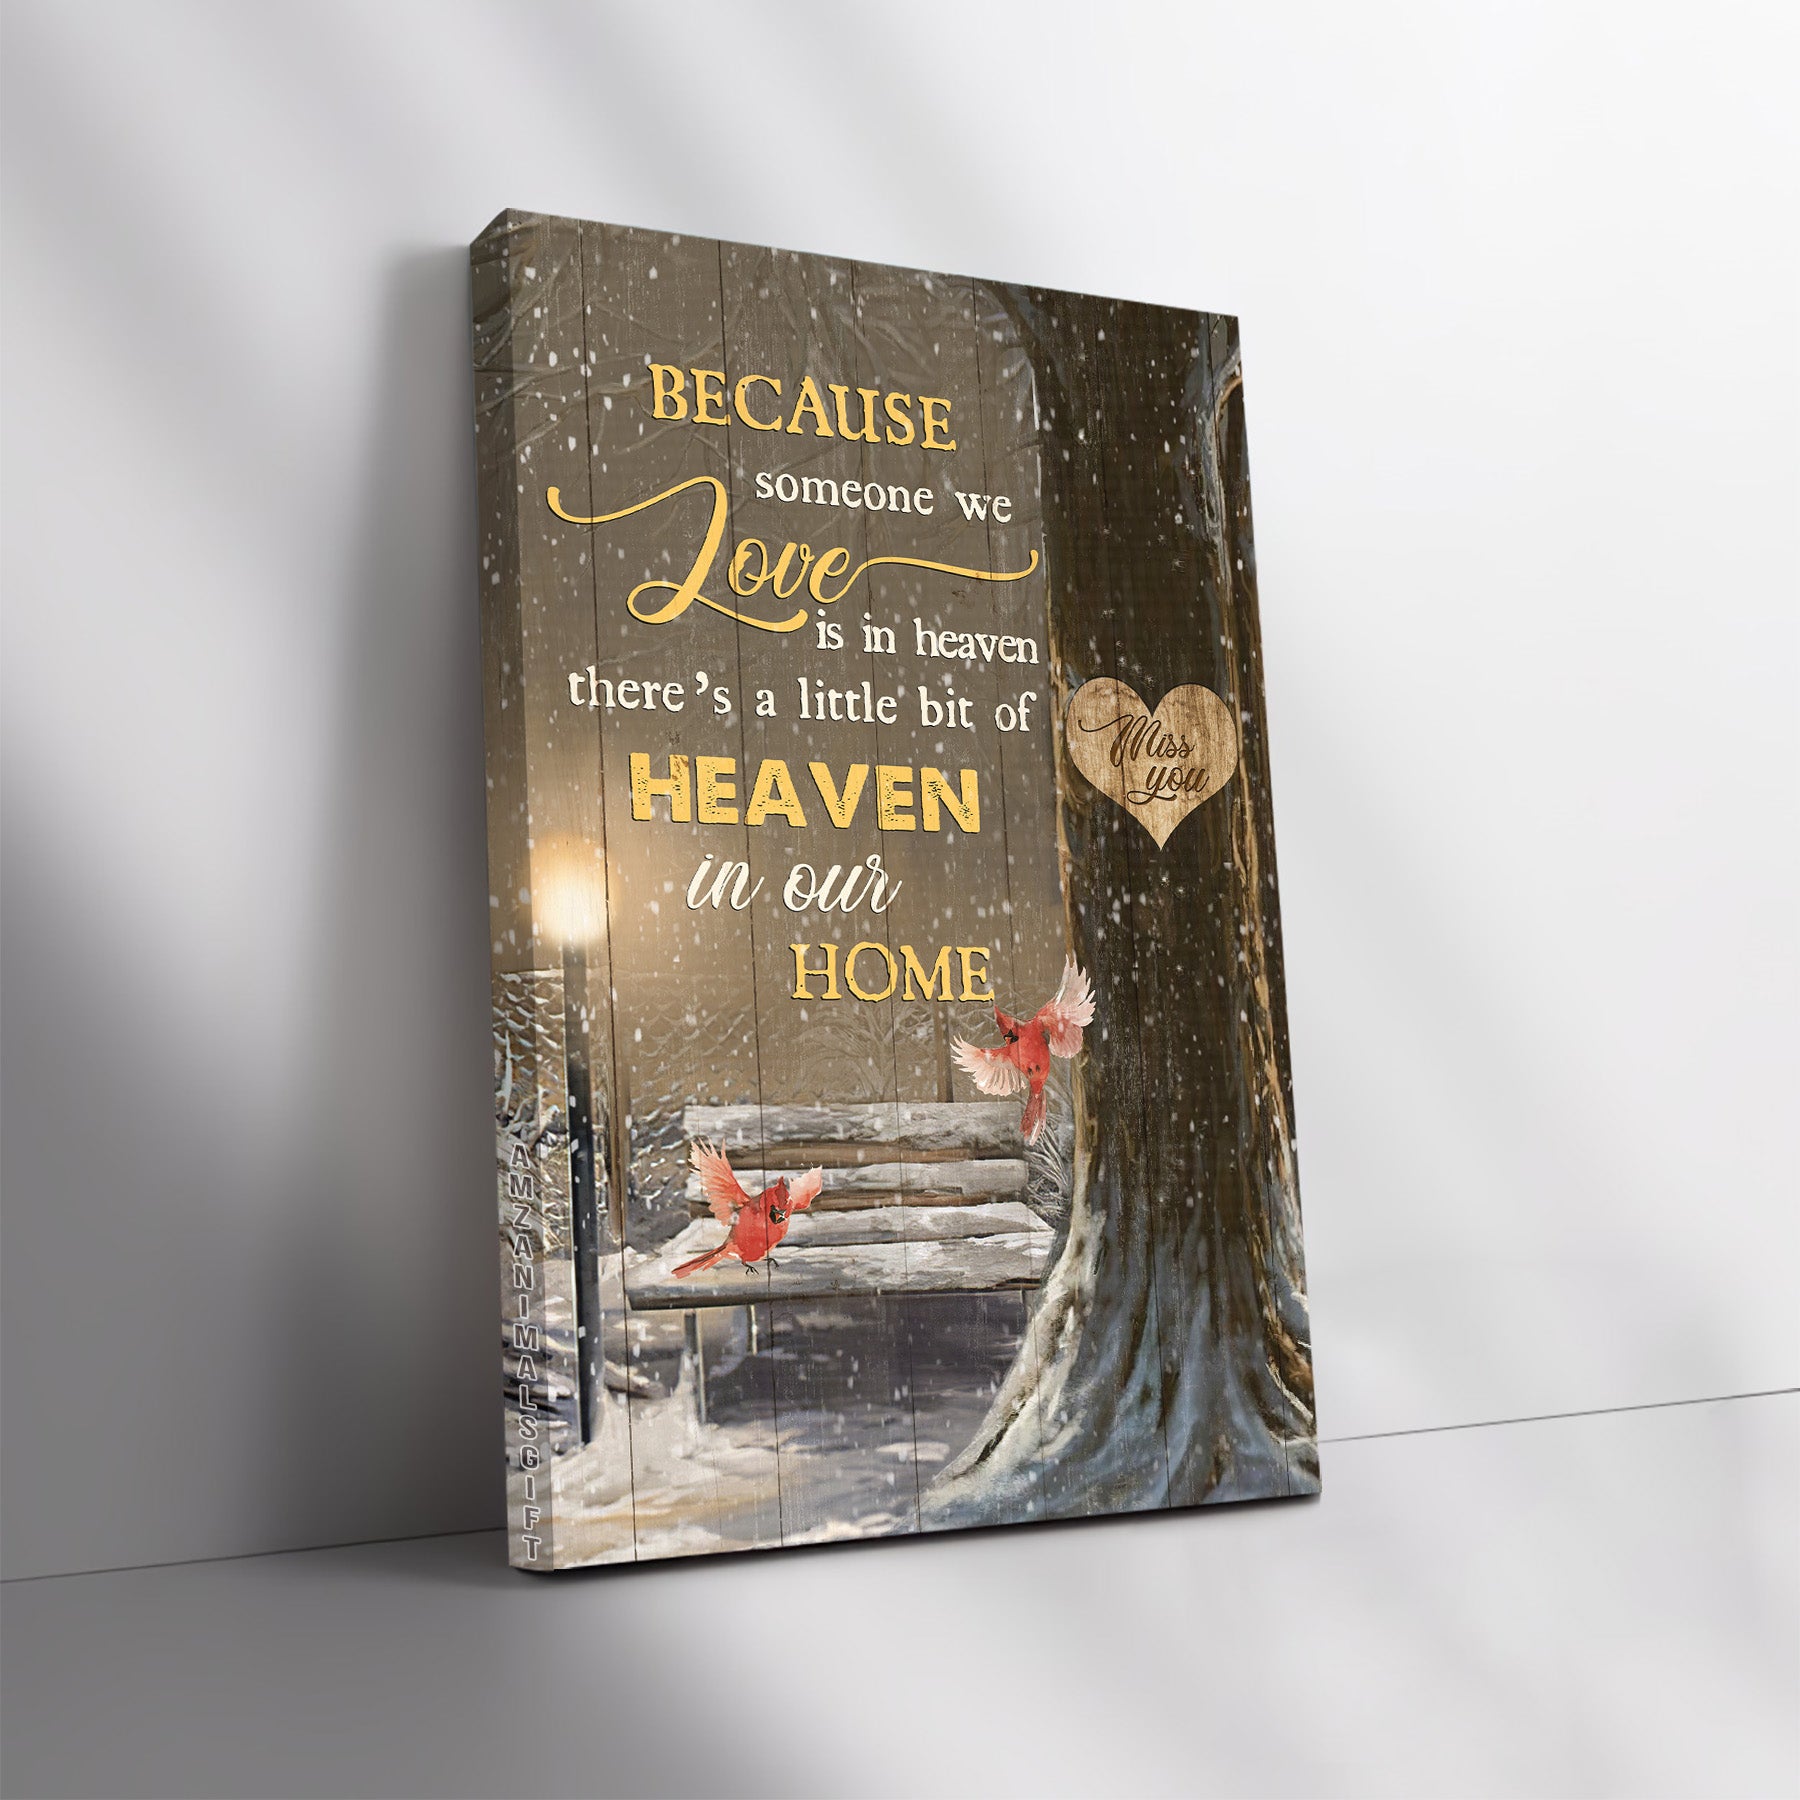 Memorial Premium Wrapped Portrait Canvas - Wooden Chair, Snow Park, Red Cardinal, There's A Little Bit Of Heaven In Our Home - Gift For Members Family